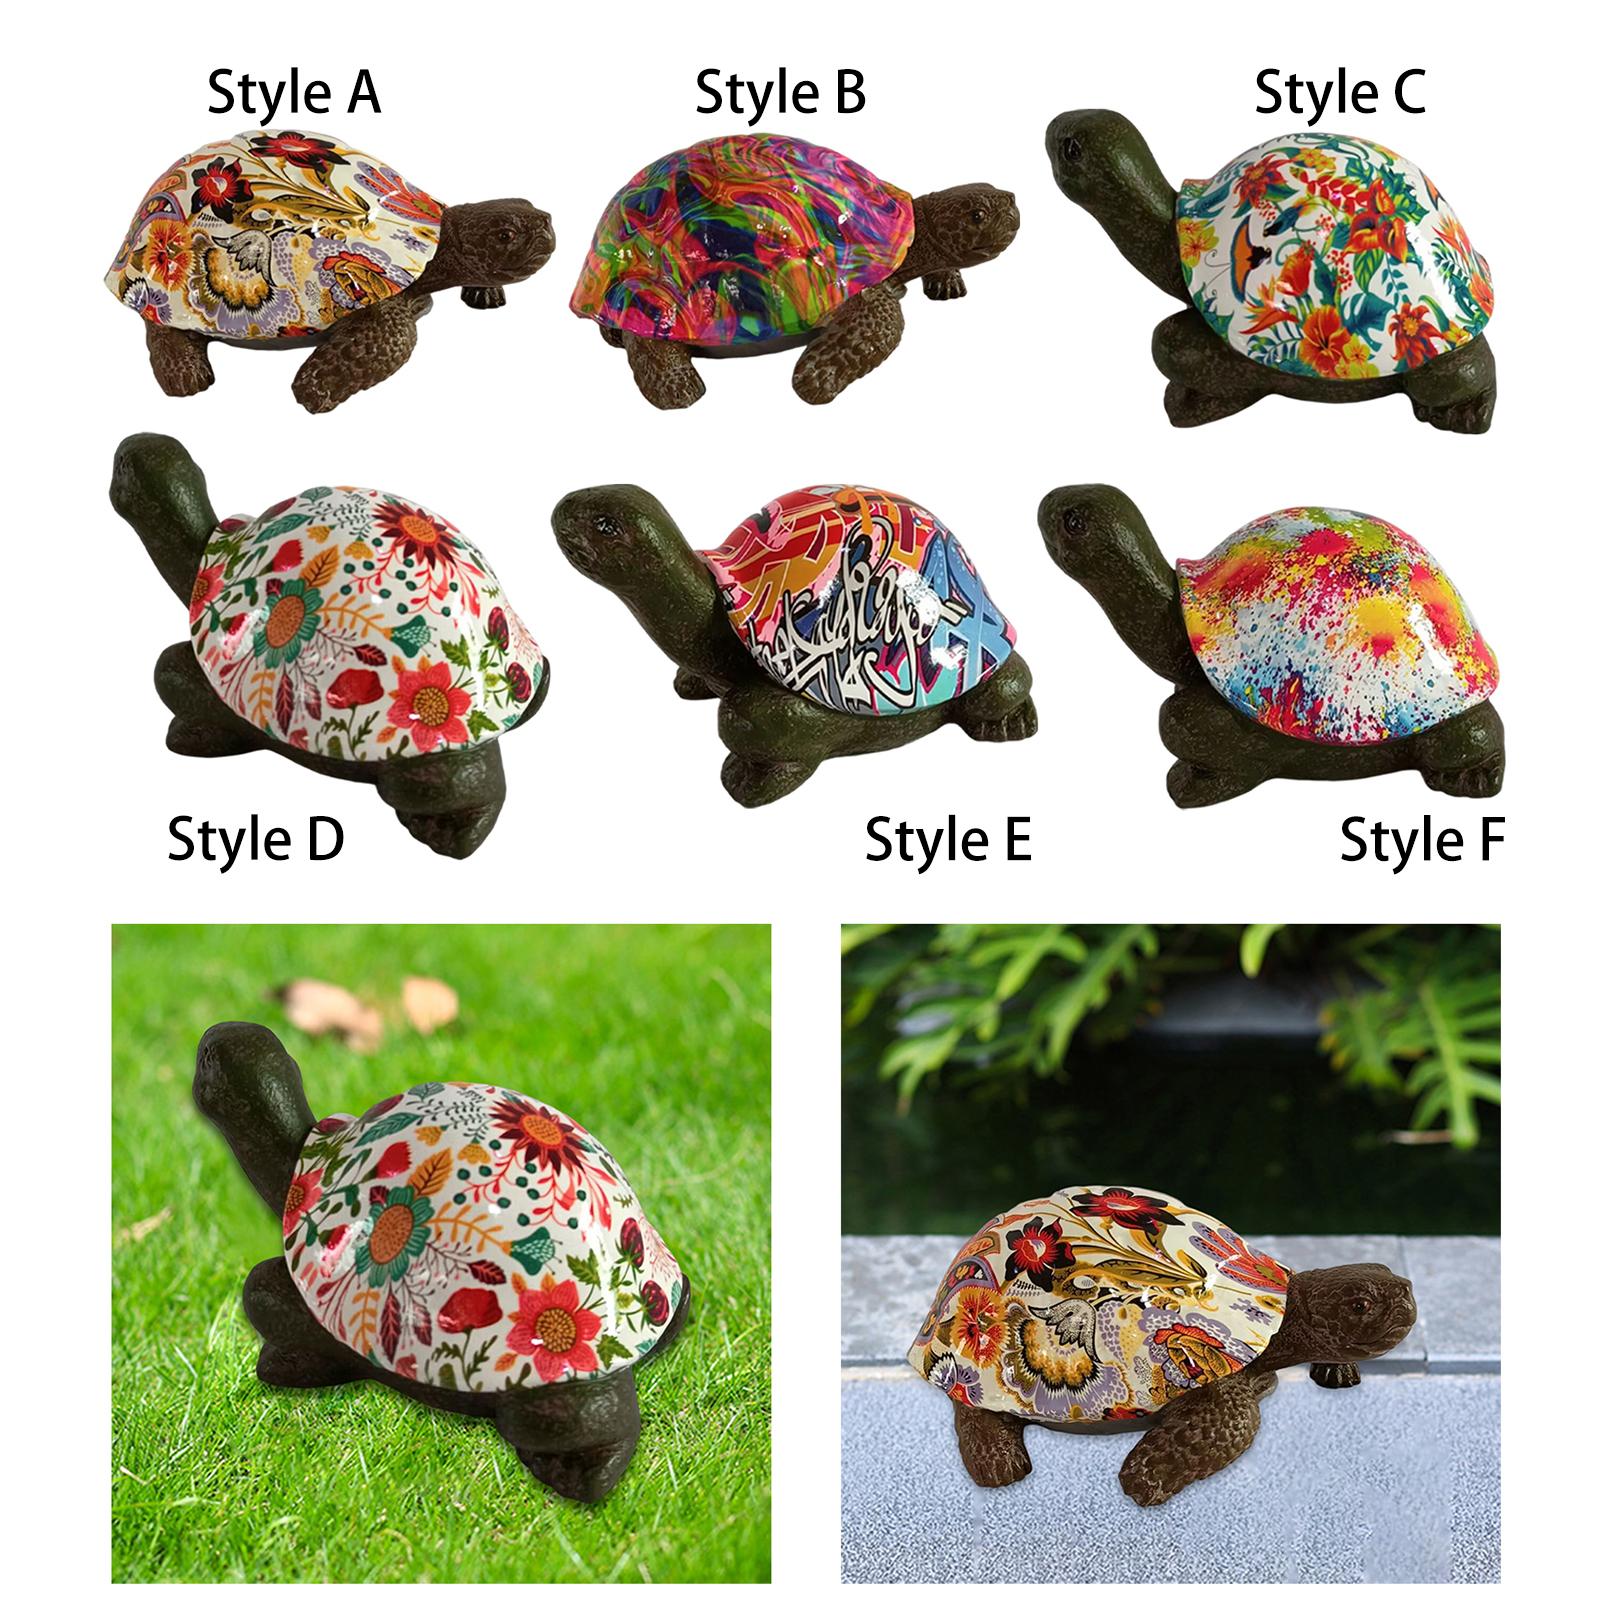 Outdoor Turtle Statues Garden Creative Craft for Backyard Parks Decoration Style A